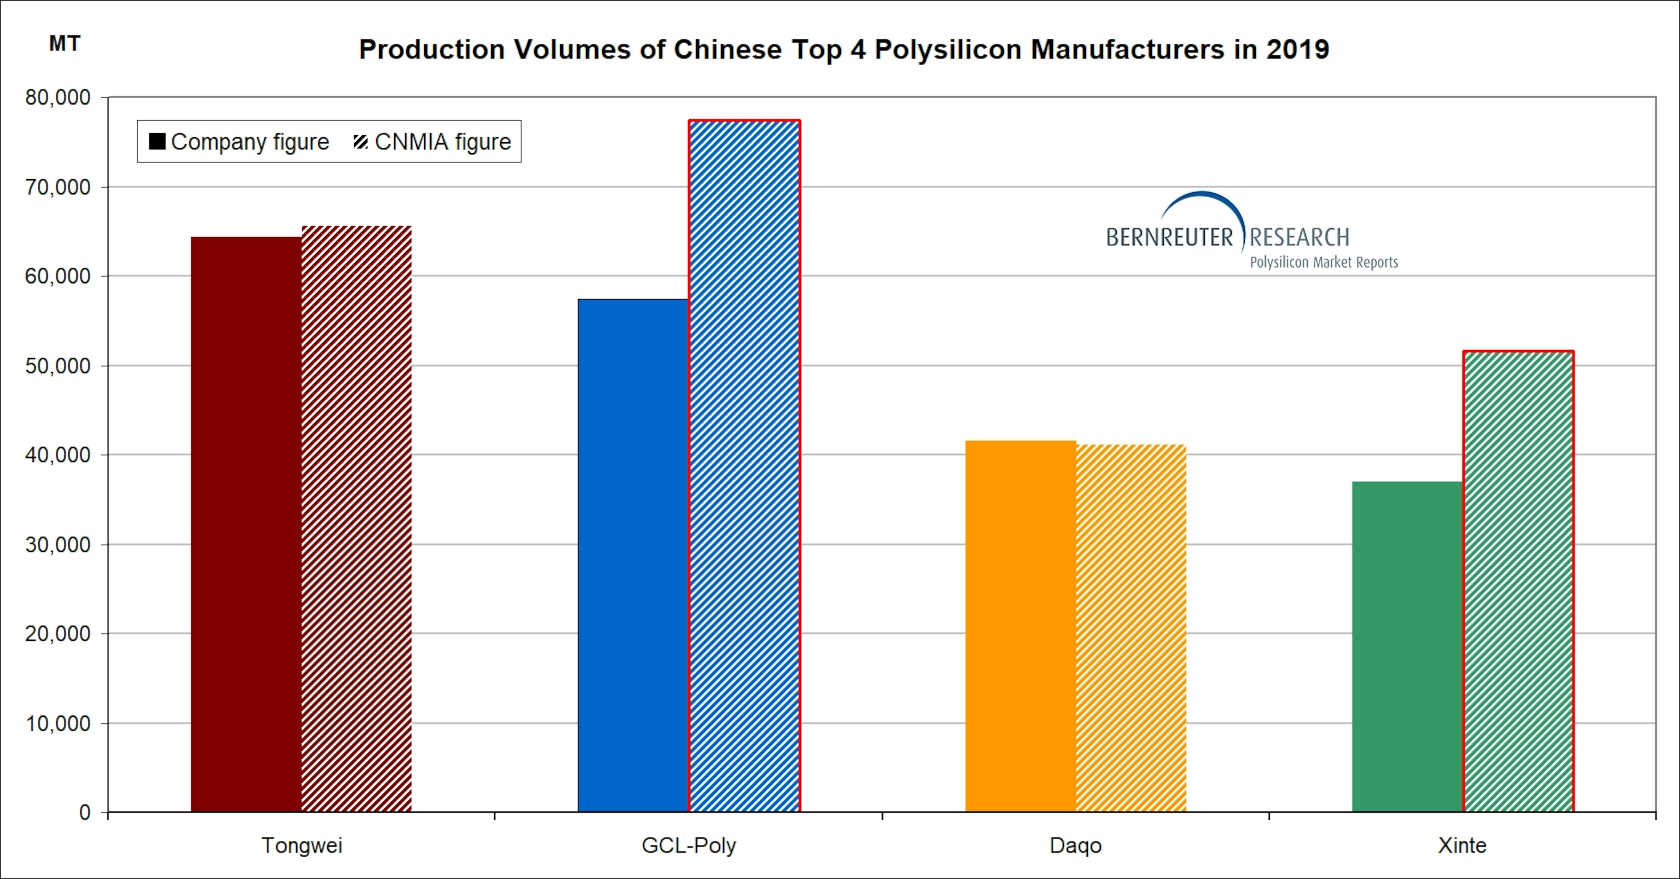 Polysilicon production volumes of the Chinese top 4 manufacturers (Tongwei, GCL-Poly, Daqo, Xinte) in 2019